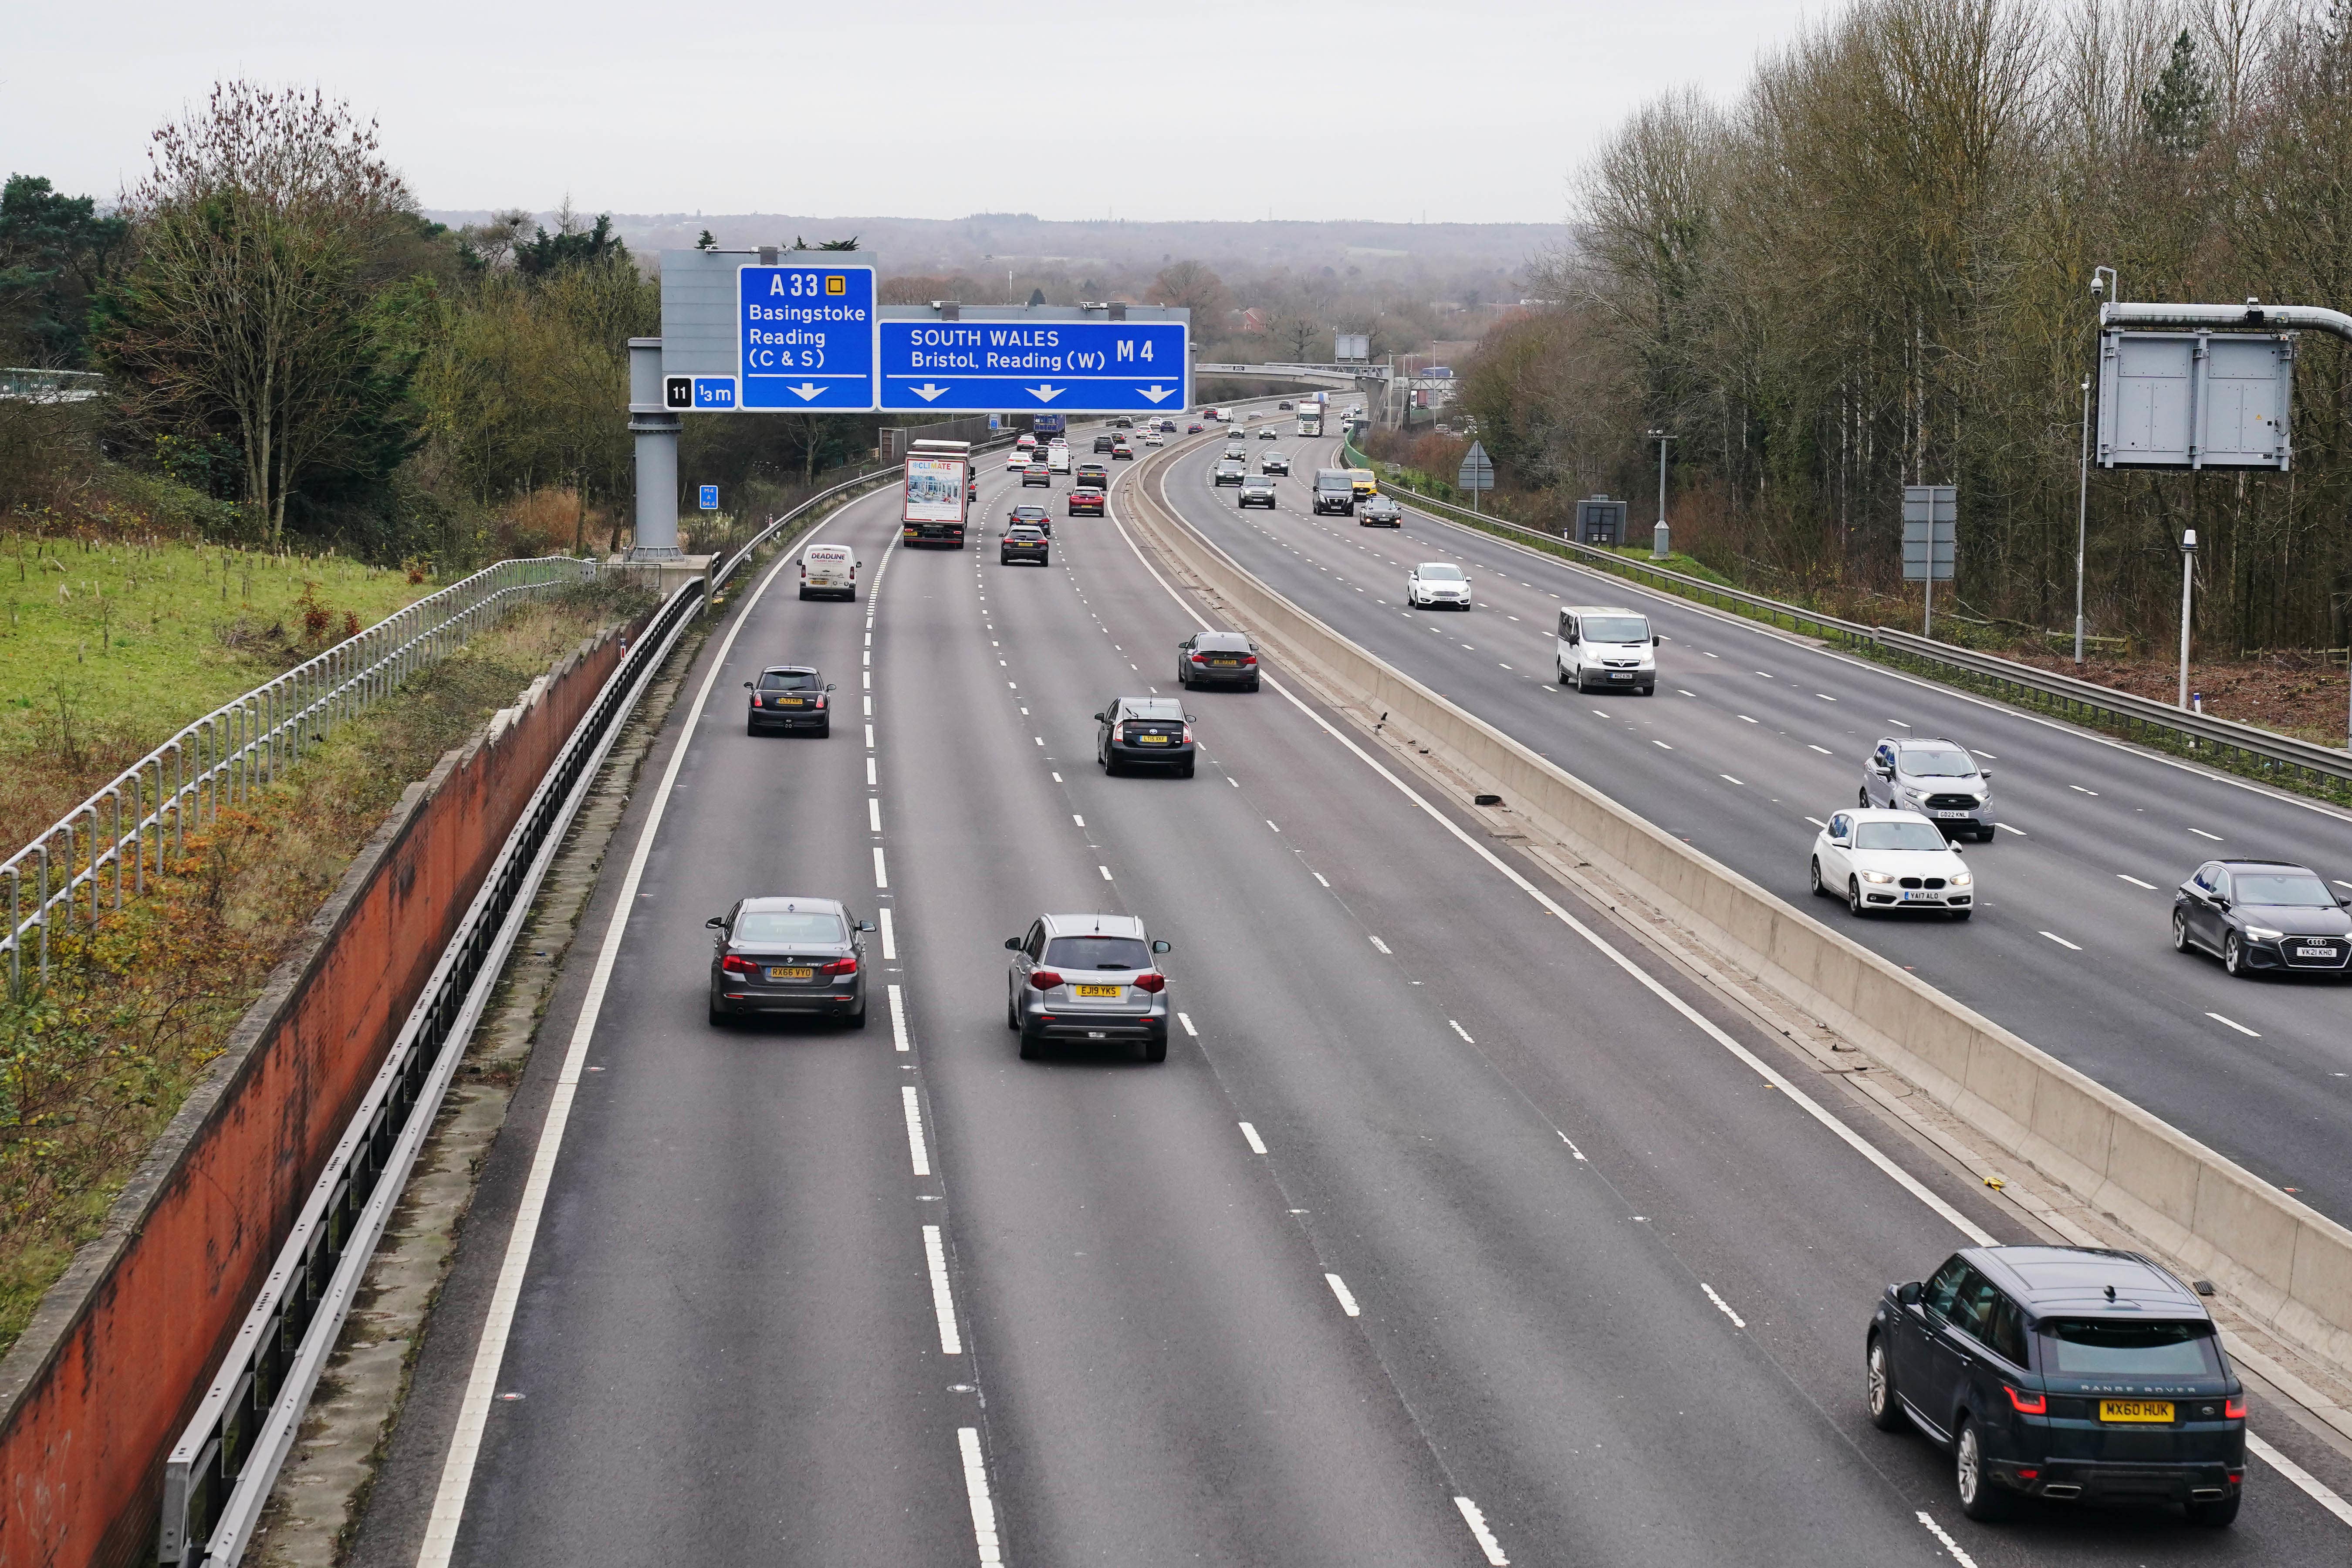 An investigation has found that technology aimed at keeping drivers safe on smart motorways frequently stops working